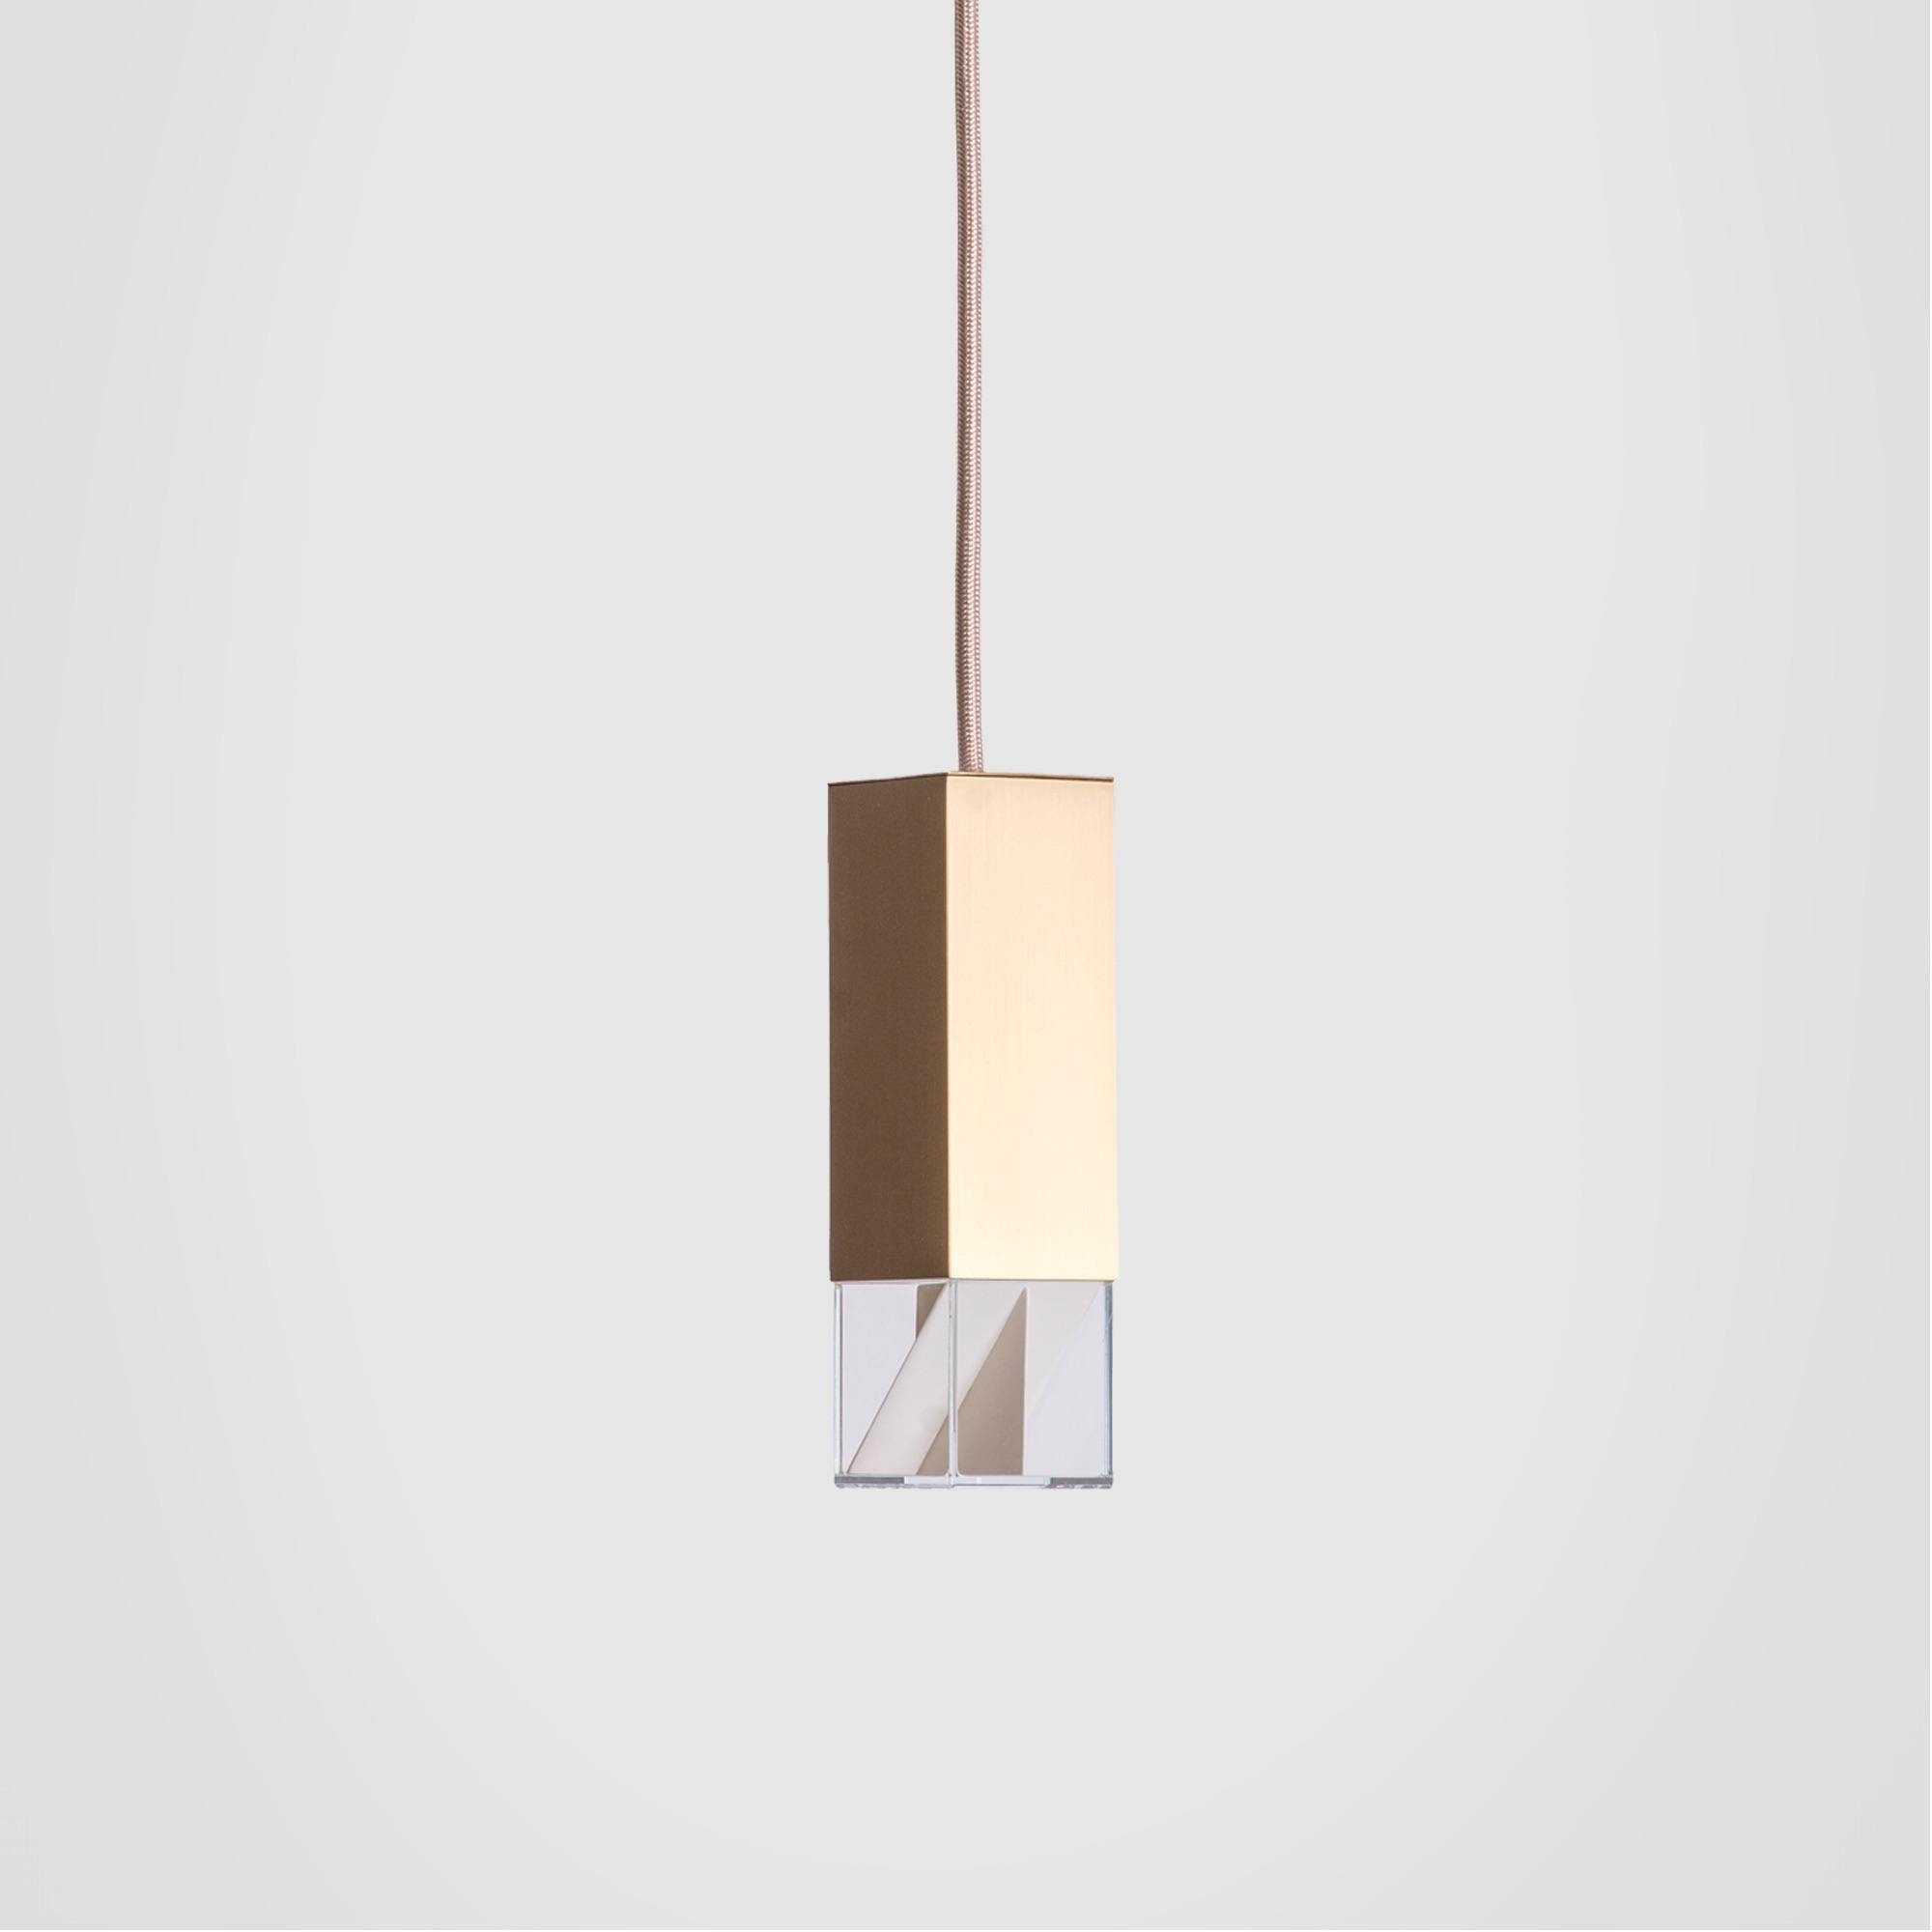 About
Golden Brass Pendant Lamp Single Suspension by Formaminima

Lamp/One Brass from Single Suspensions Series
Design by Formaminima
Single Pendant
Materials:
Body lamp handcrafted in solid brass golden finish / crystal glass diffuser hosting